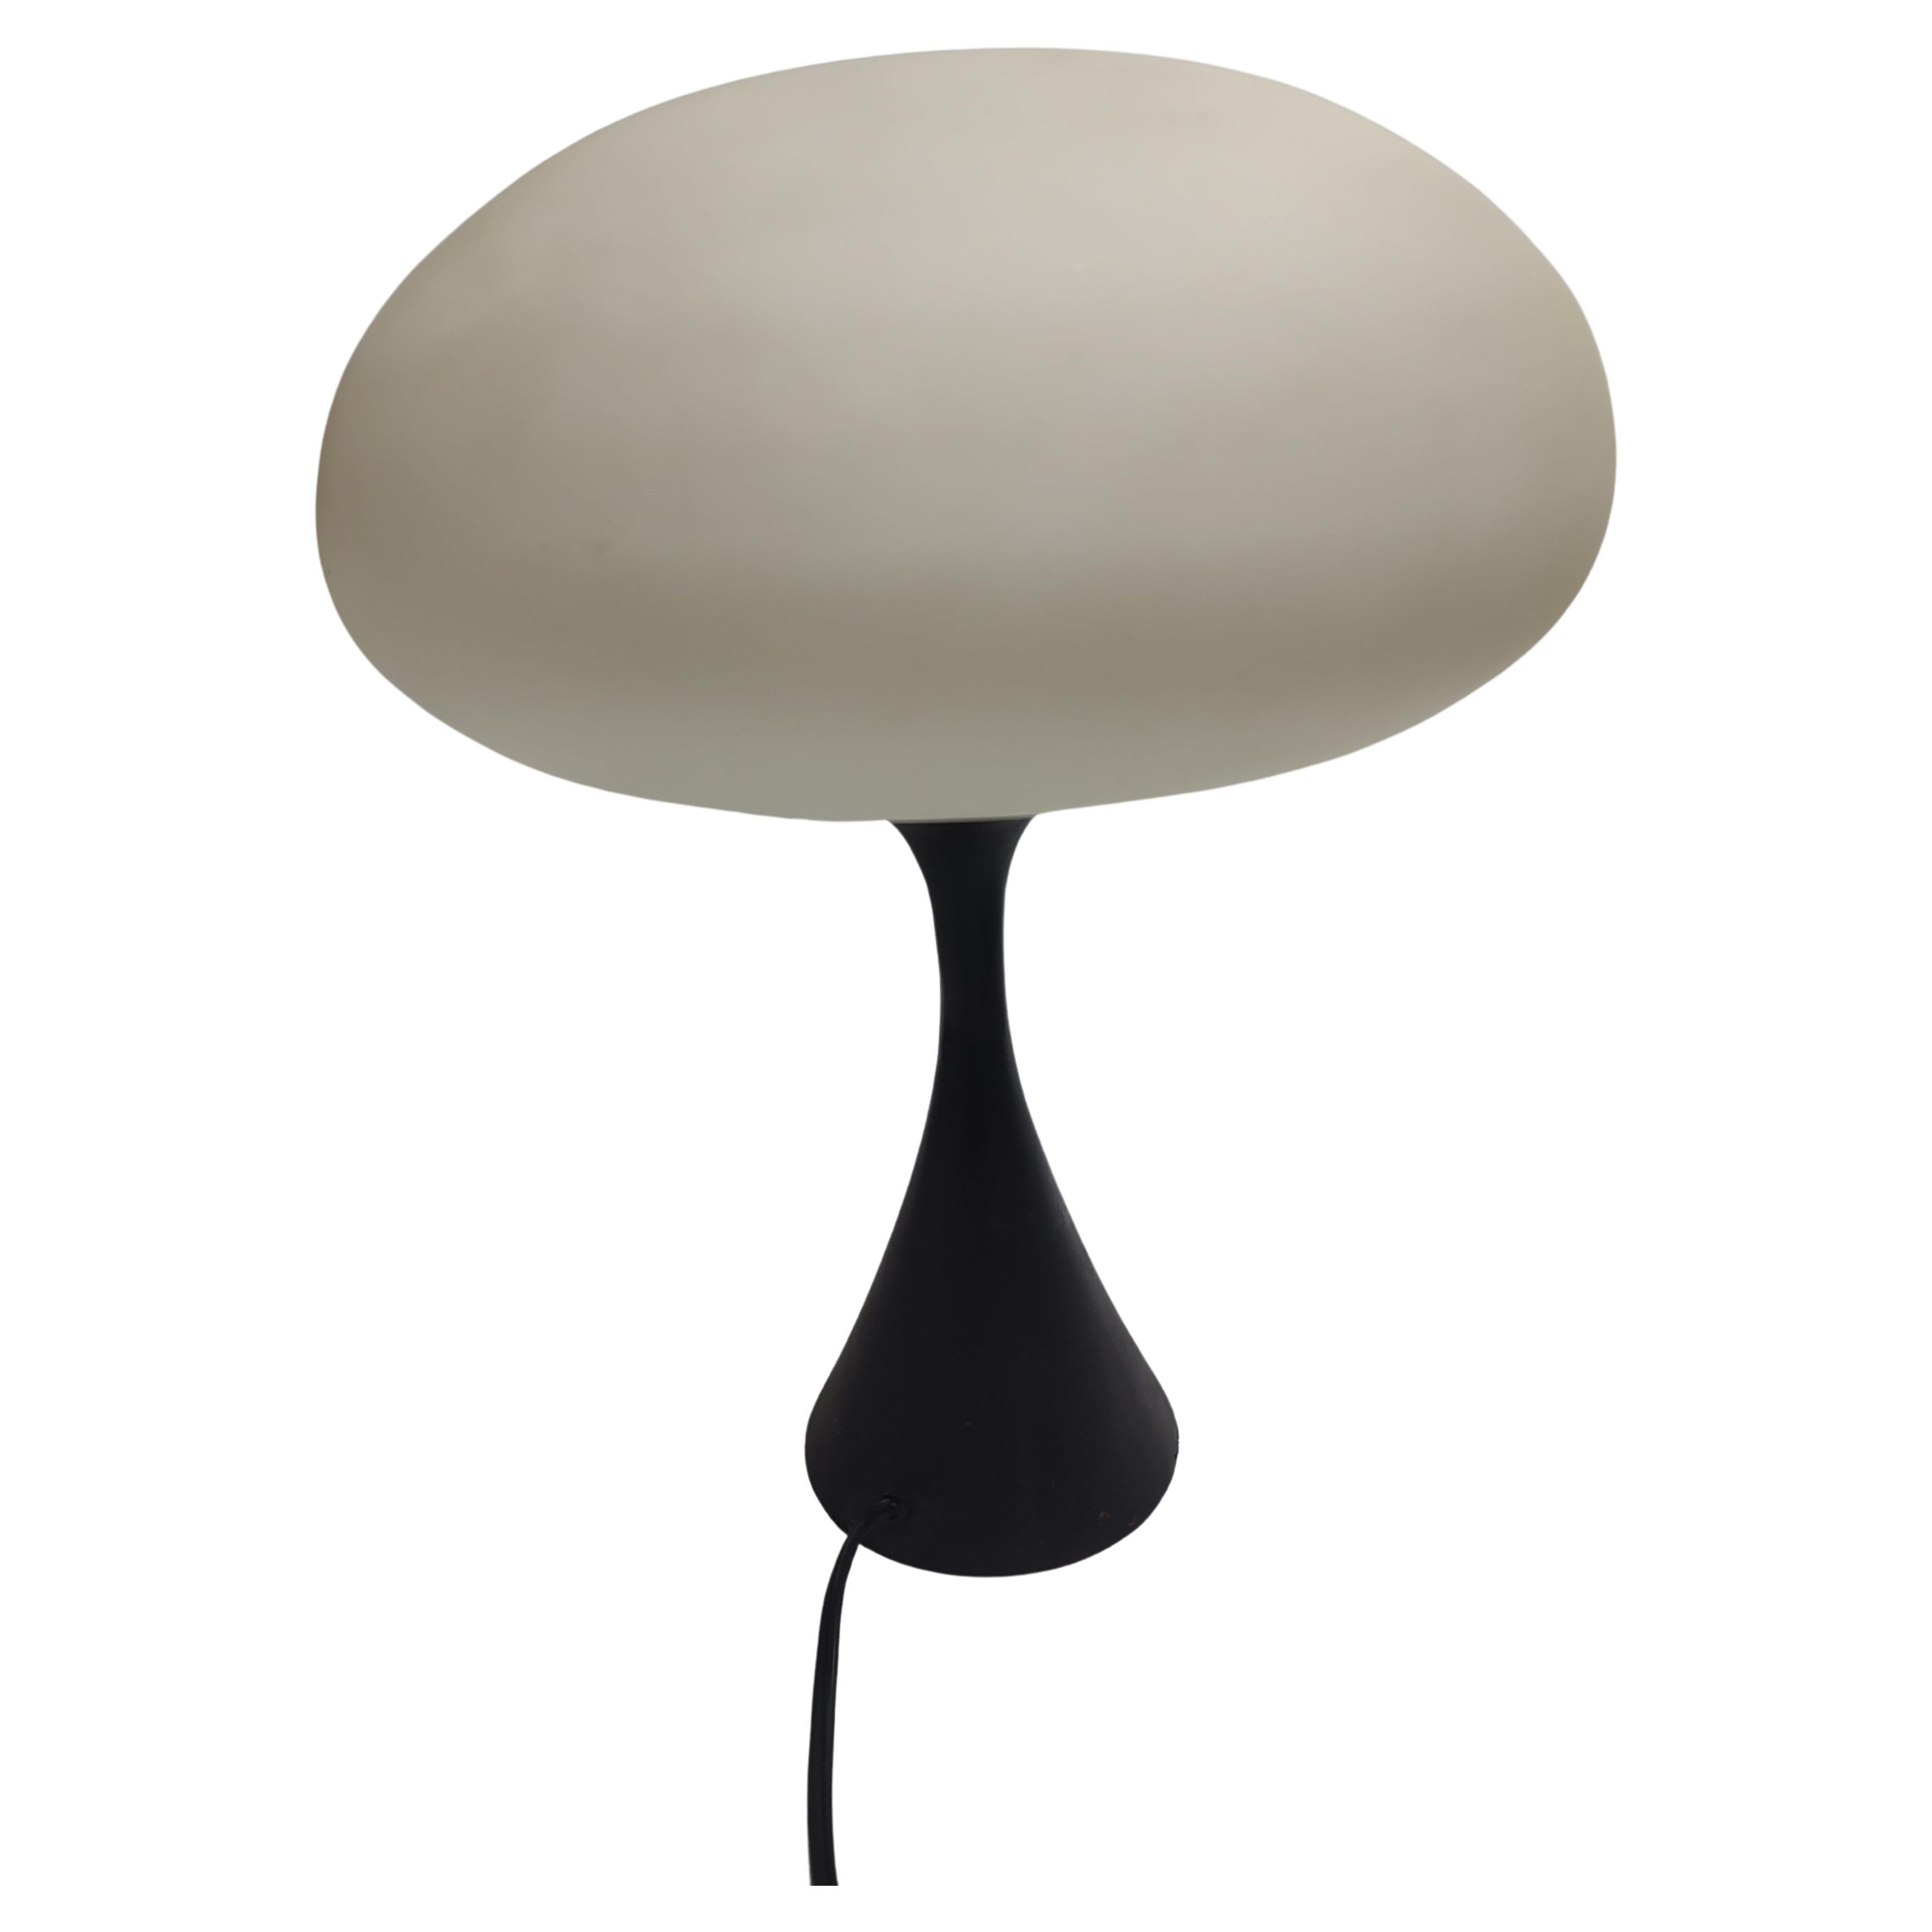 Fabulous mushroom table lamp from the mid sixties with a 3-way switch and inline switch also. Taller version with a heavy cast iron base for stability. Rewired. In excellent vintage condition with minimal wear. We have several other Mushroom shade